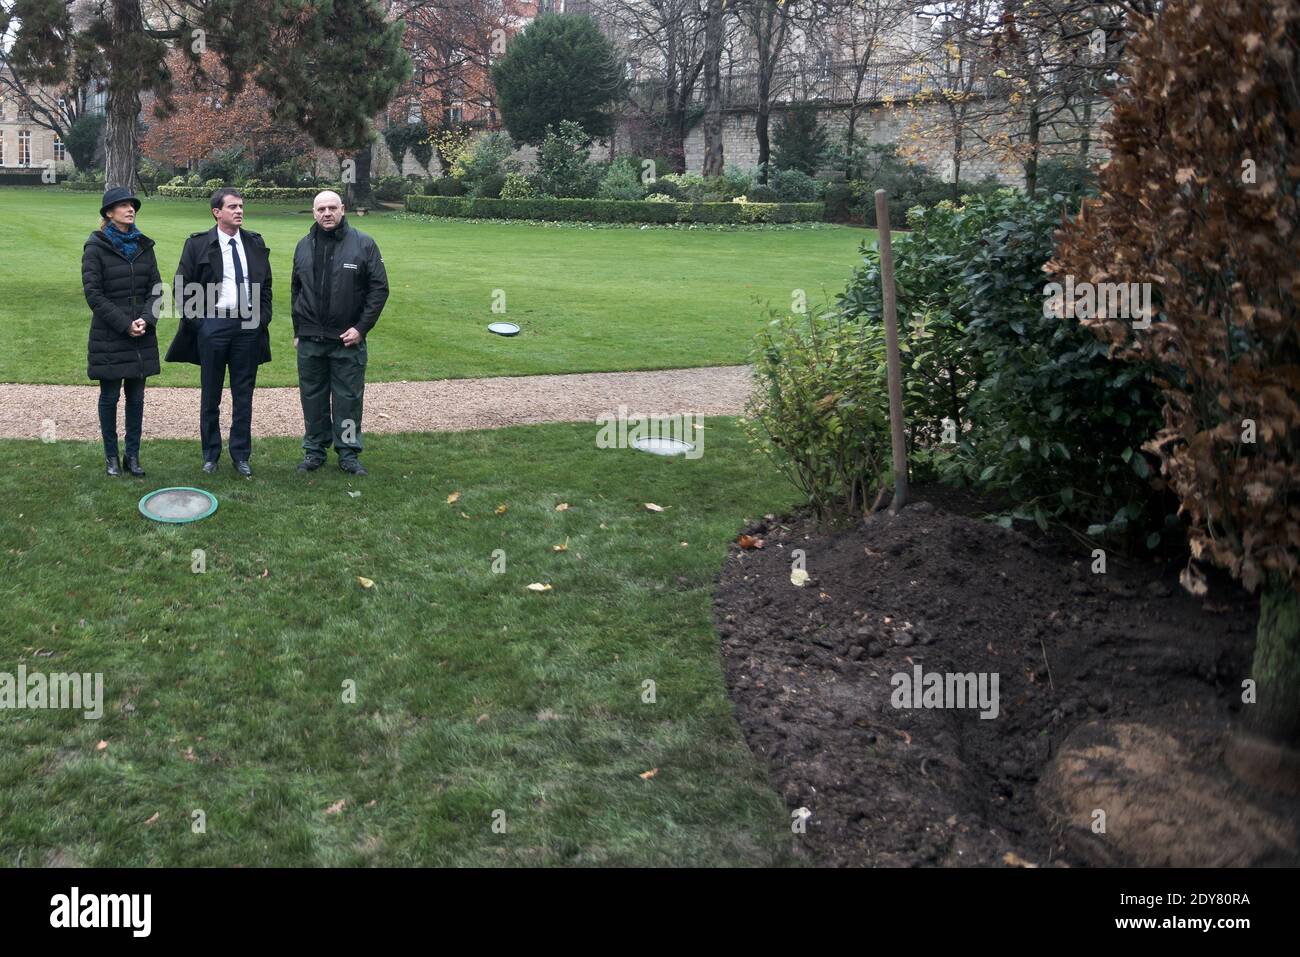 French Prime Minister Manuel Valls arriving along with his wife Anne Gravoin and a gardener to plant the tree called 'of the Prime Minister' - as is the republican tradition - in the gardens of his headquarters Hotel de Matignon in Paris, France on December 16, 2014. The tree, chosen by the Prime Minister, is an oak of the species 'Quercus robur fastigiata' and is located on the front lawn. The tradition of planting a tree at the PM's headquarters was introduced by the late Prime Minister Raymond Barre in 1978. Photo Pool by Nicolas Messyasz/ABACAPRESS.COM Stock Photo